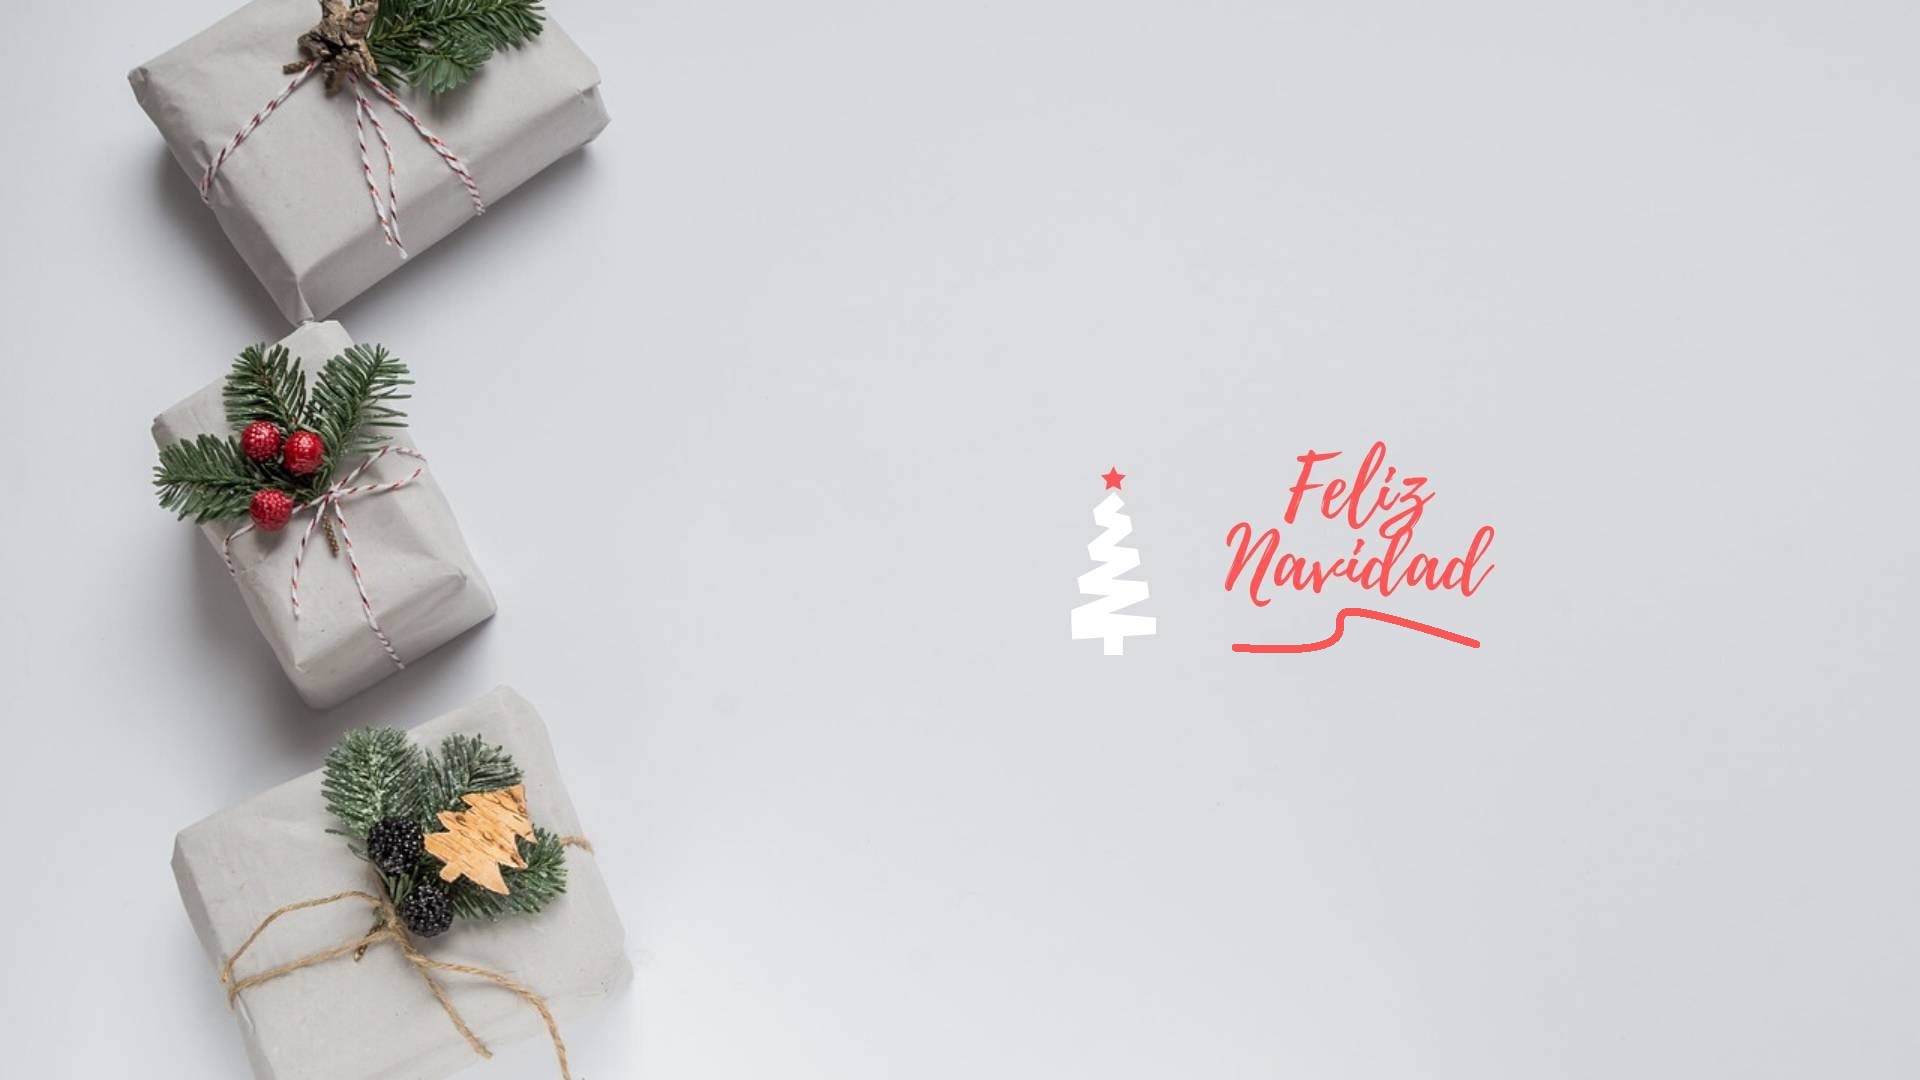 General 1920x1080 Christmas presents Christmas minimalism simple background